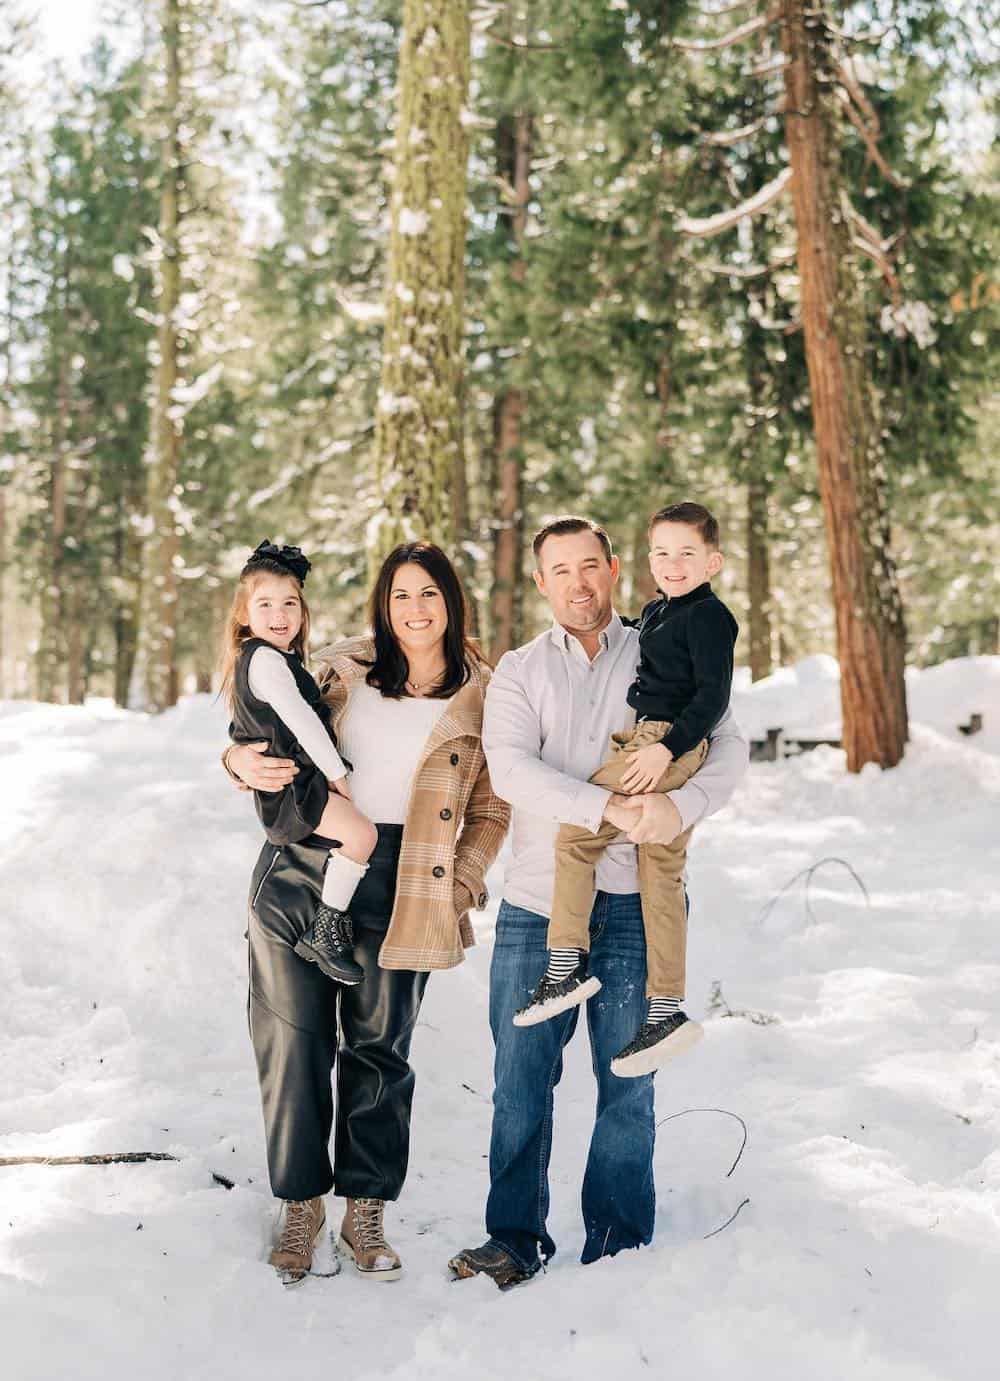 winter family photoshoot with the family wearing black, white, and beige neutral colors